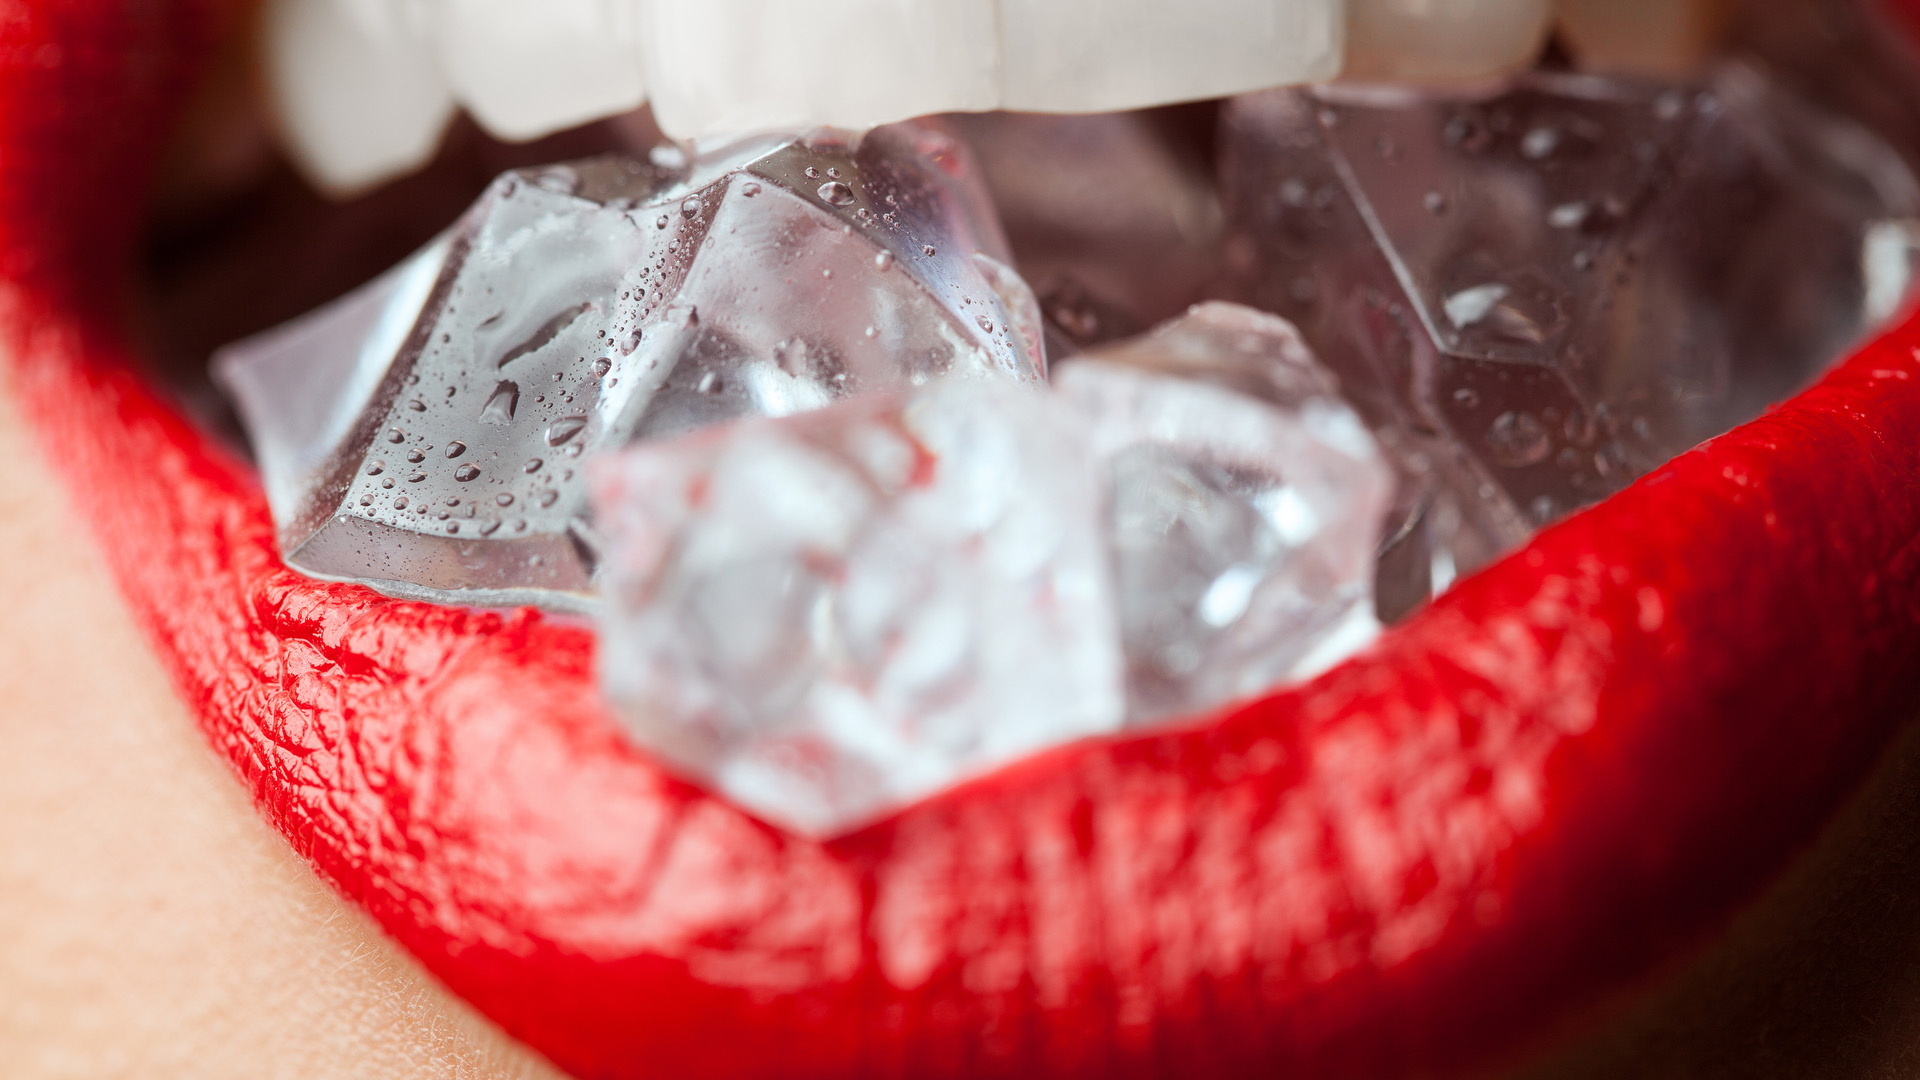 Open mouth of a woman in red lipstick biting down on ice cubes.